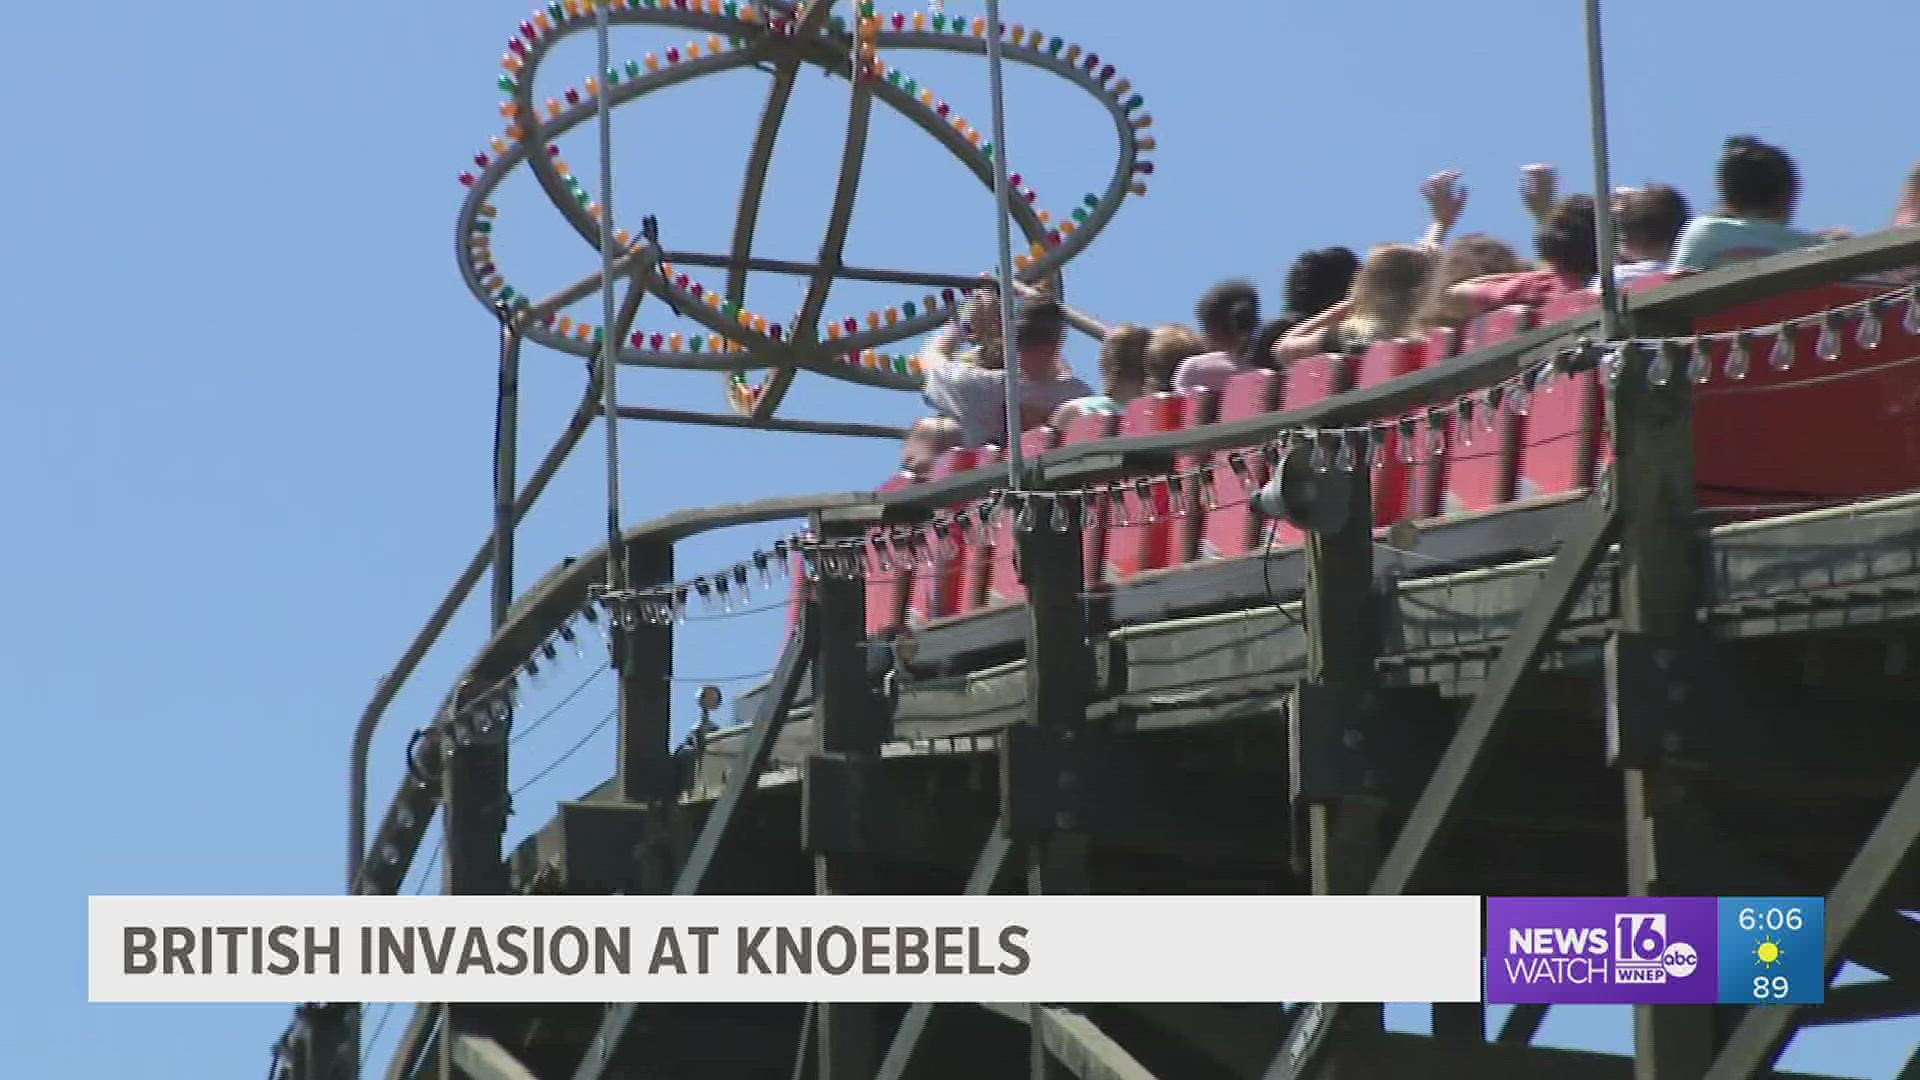 The Roller Coaster Club of Great Britain spent some time at Knoebels Amusement Resort.